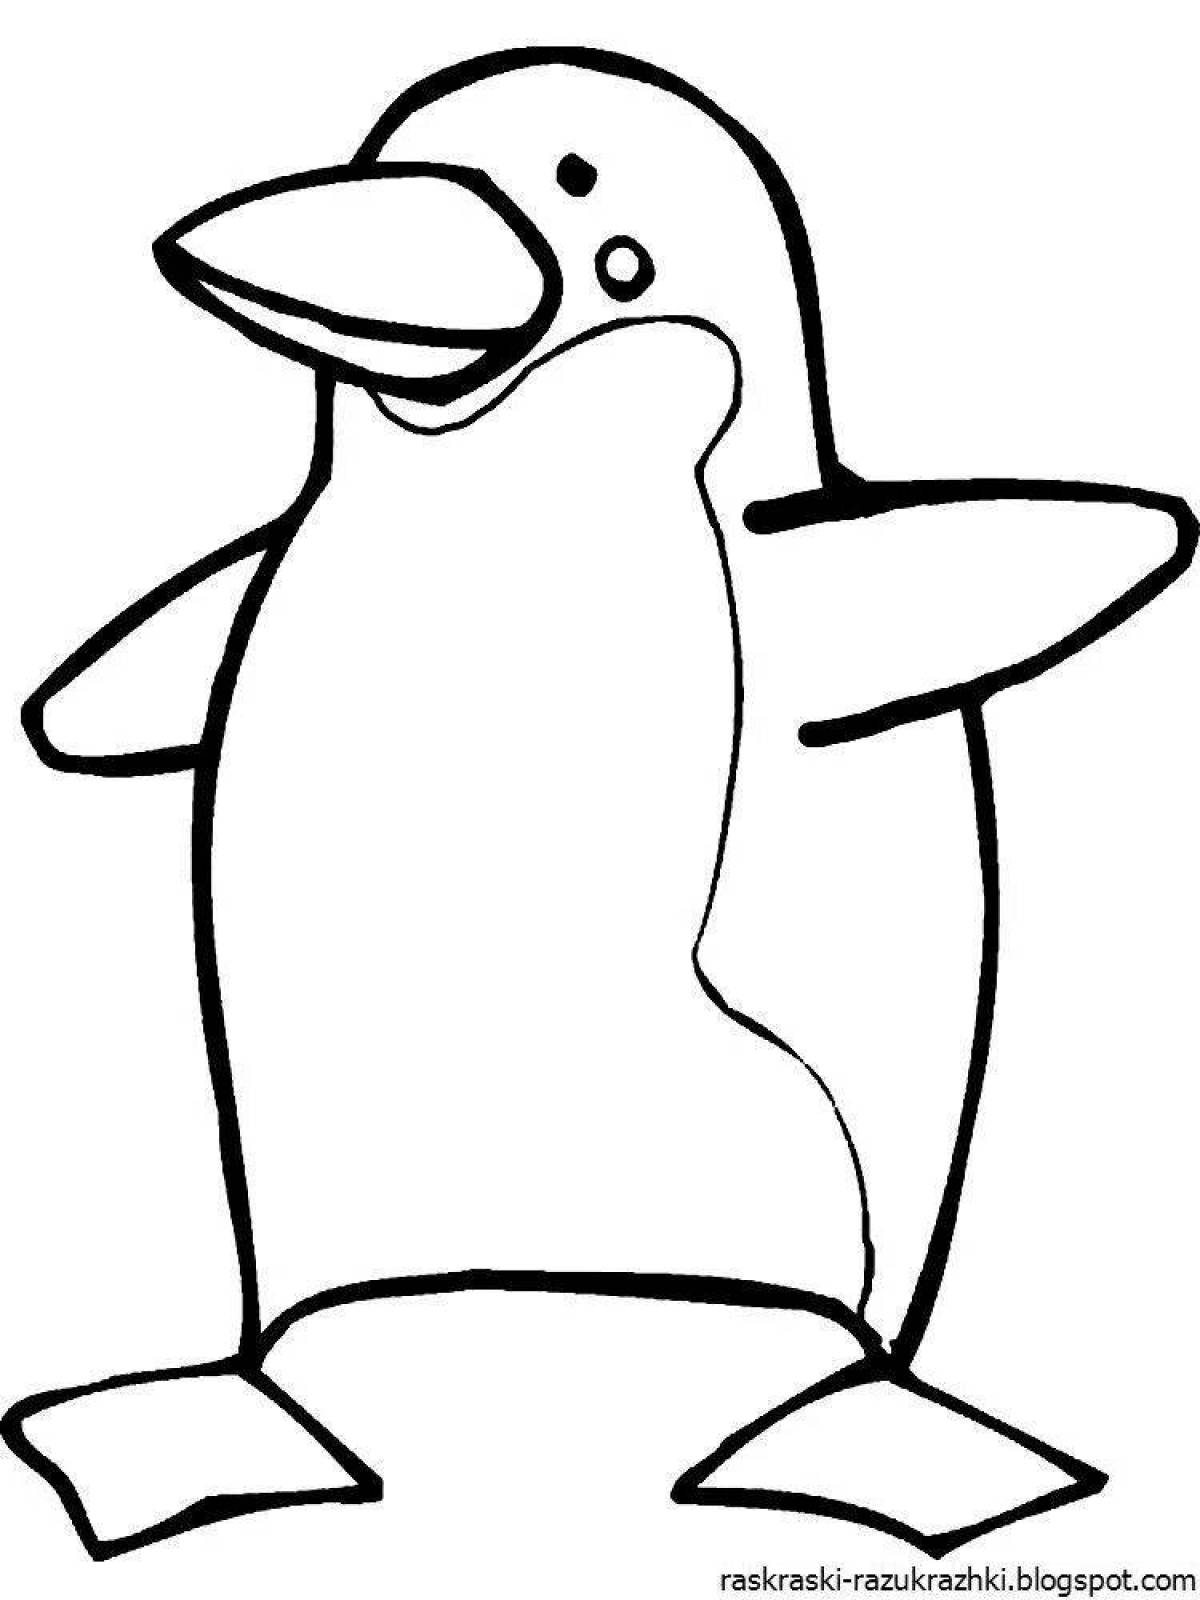 An entertaining drawing of a penguin for children